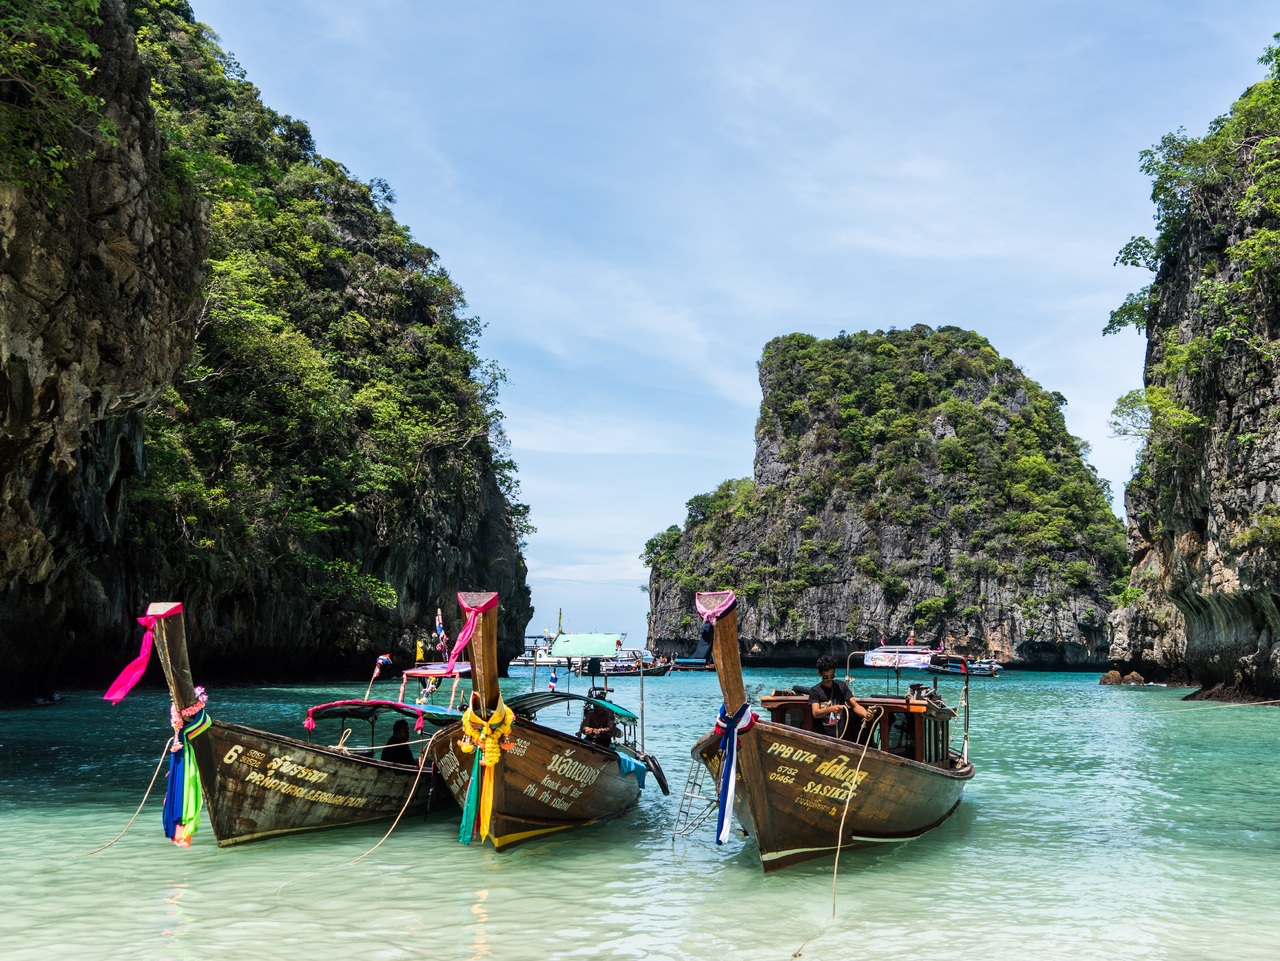 The pandemic has significantly impacted Thailand, which saw less than 200,000 visitors in 2020 compared to over 40 million expected in 2019.